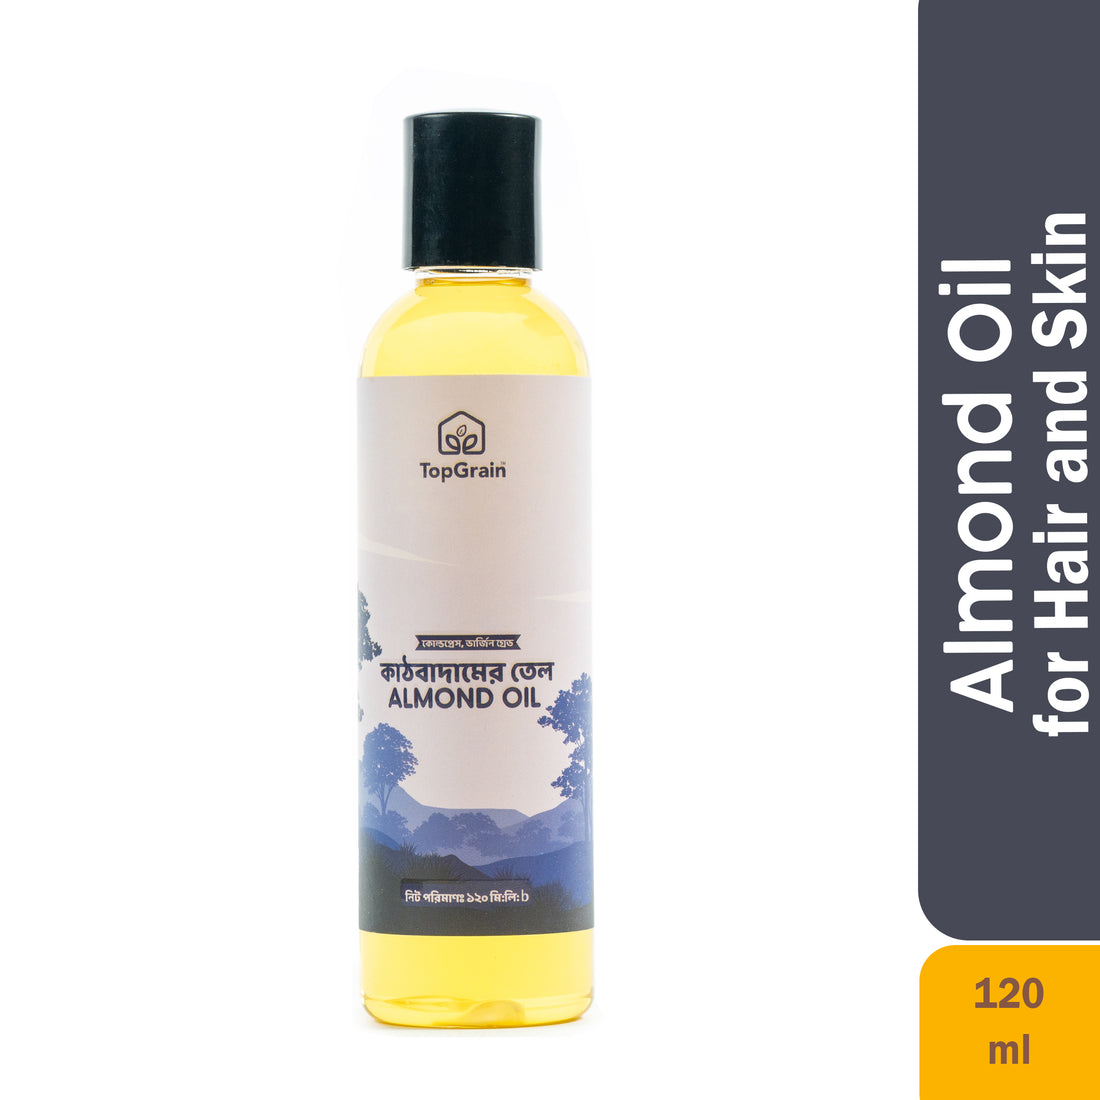 TopGrain Almond Oil for Hair and Skin (120ml)